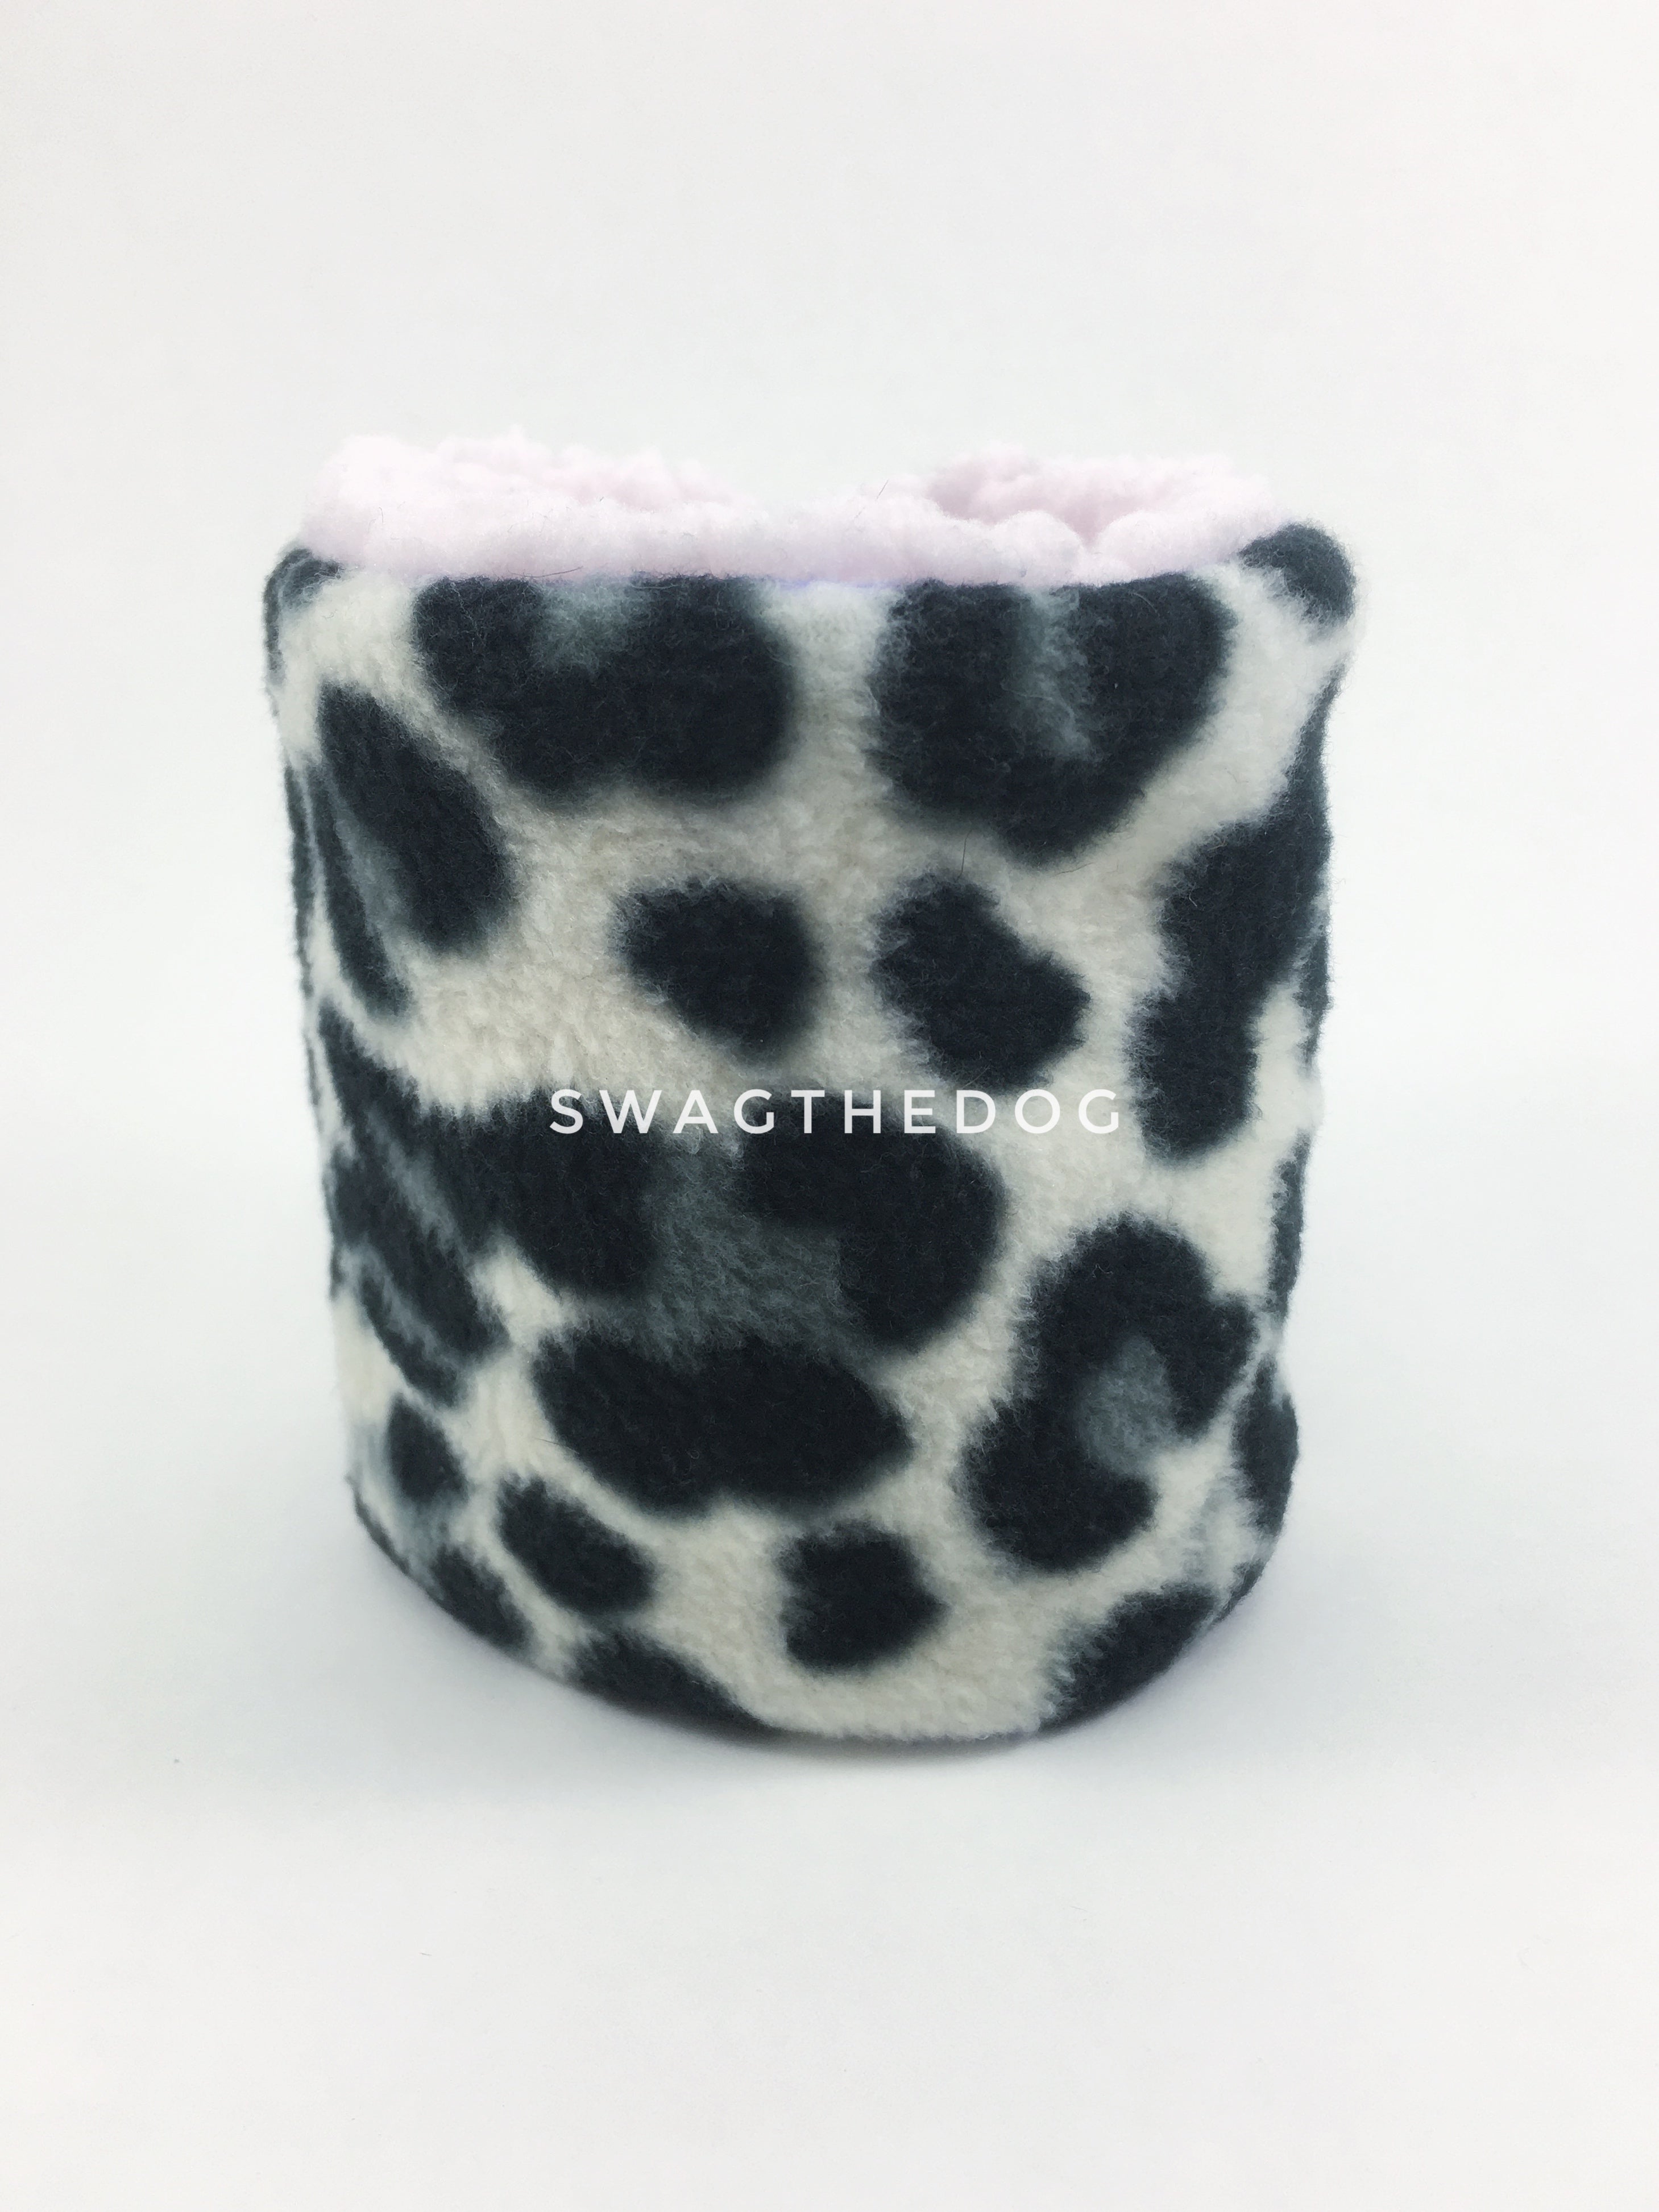 Gray Snow Leopard Swagsnood - Product Front View. Gray snow leopard print fleece Dog Snood and pink sherpa peeking out